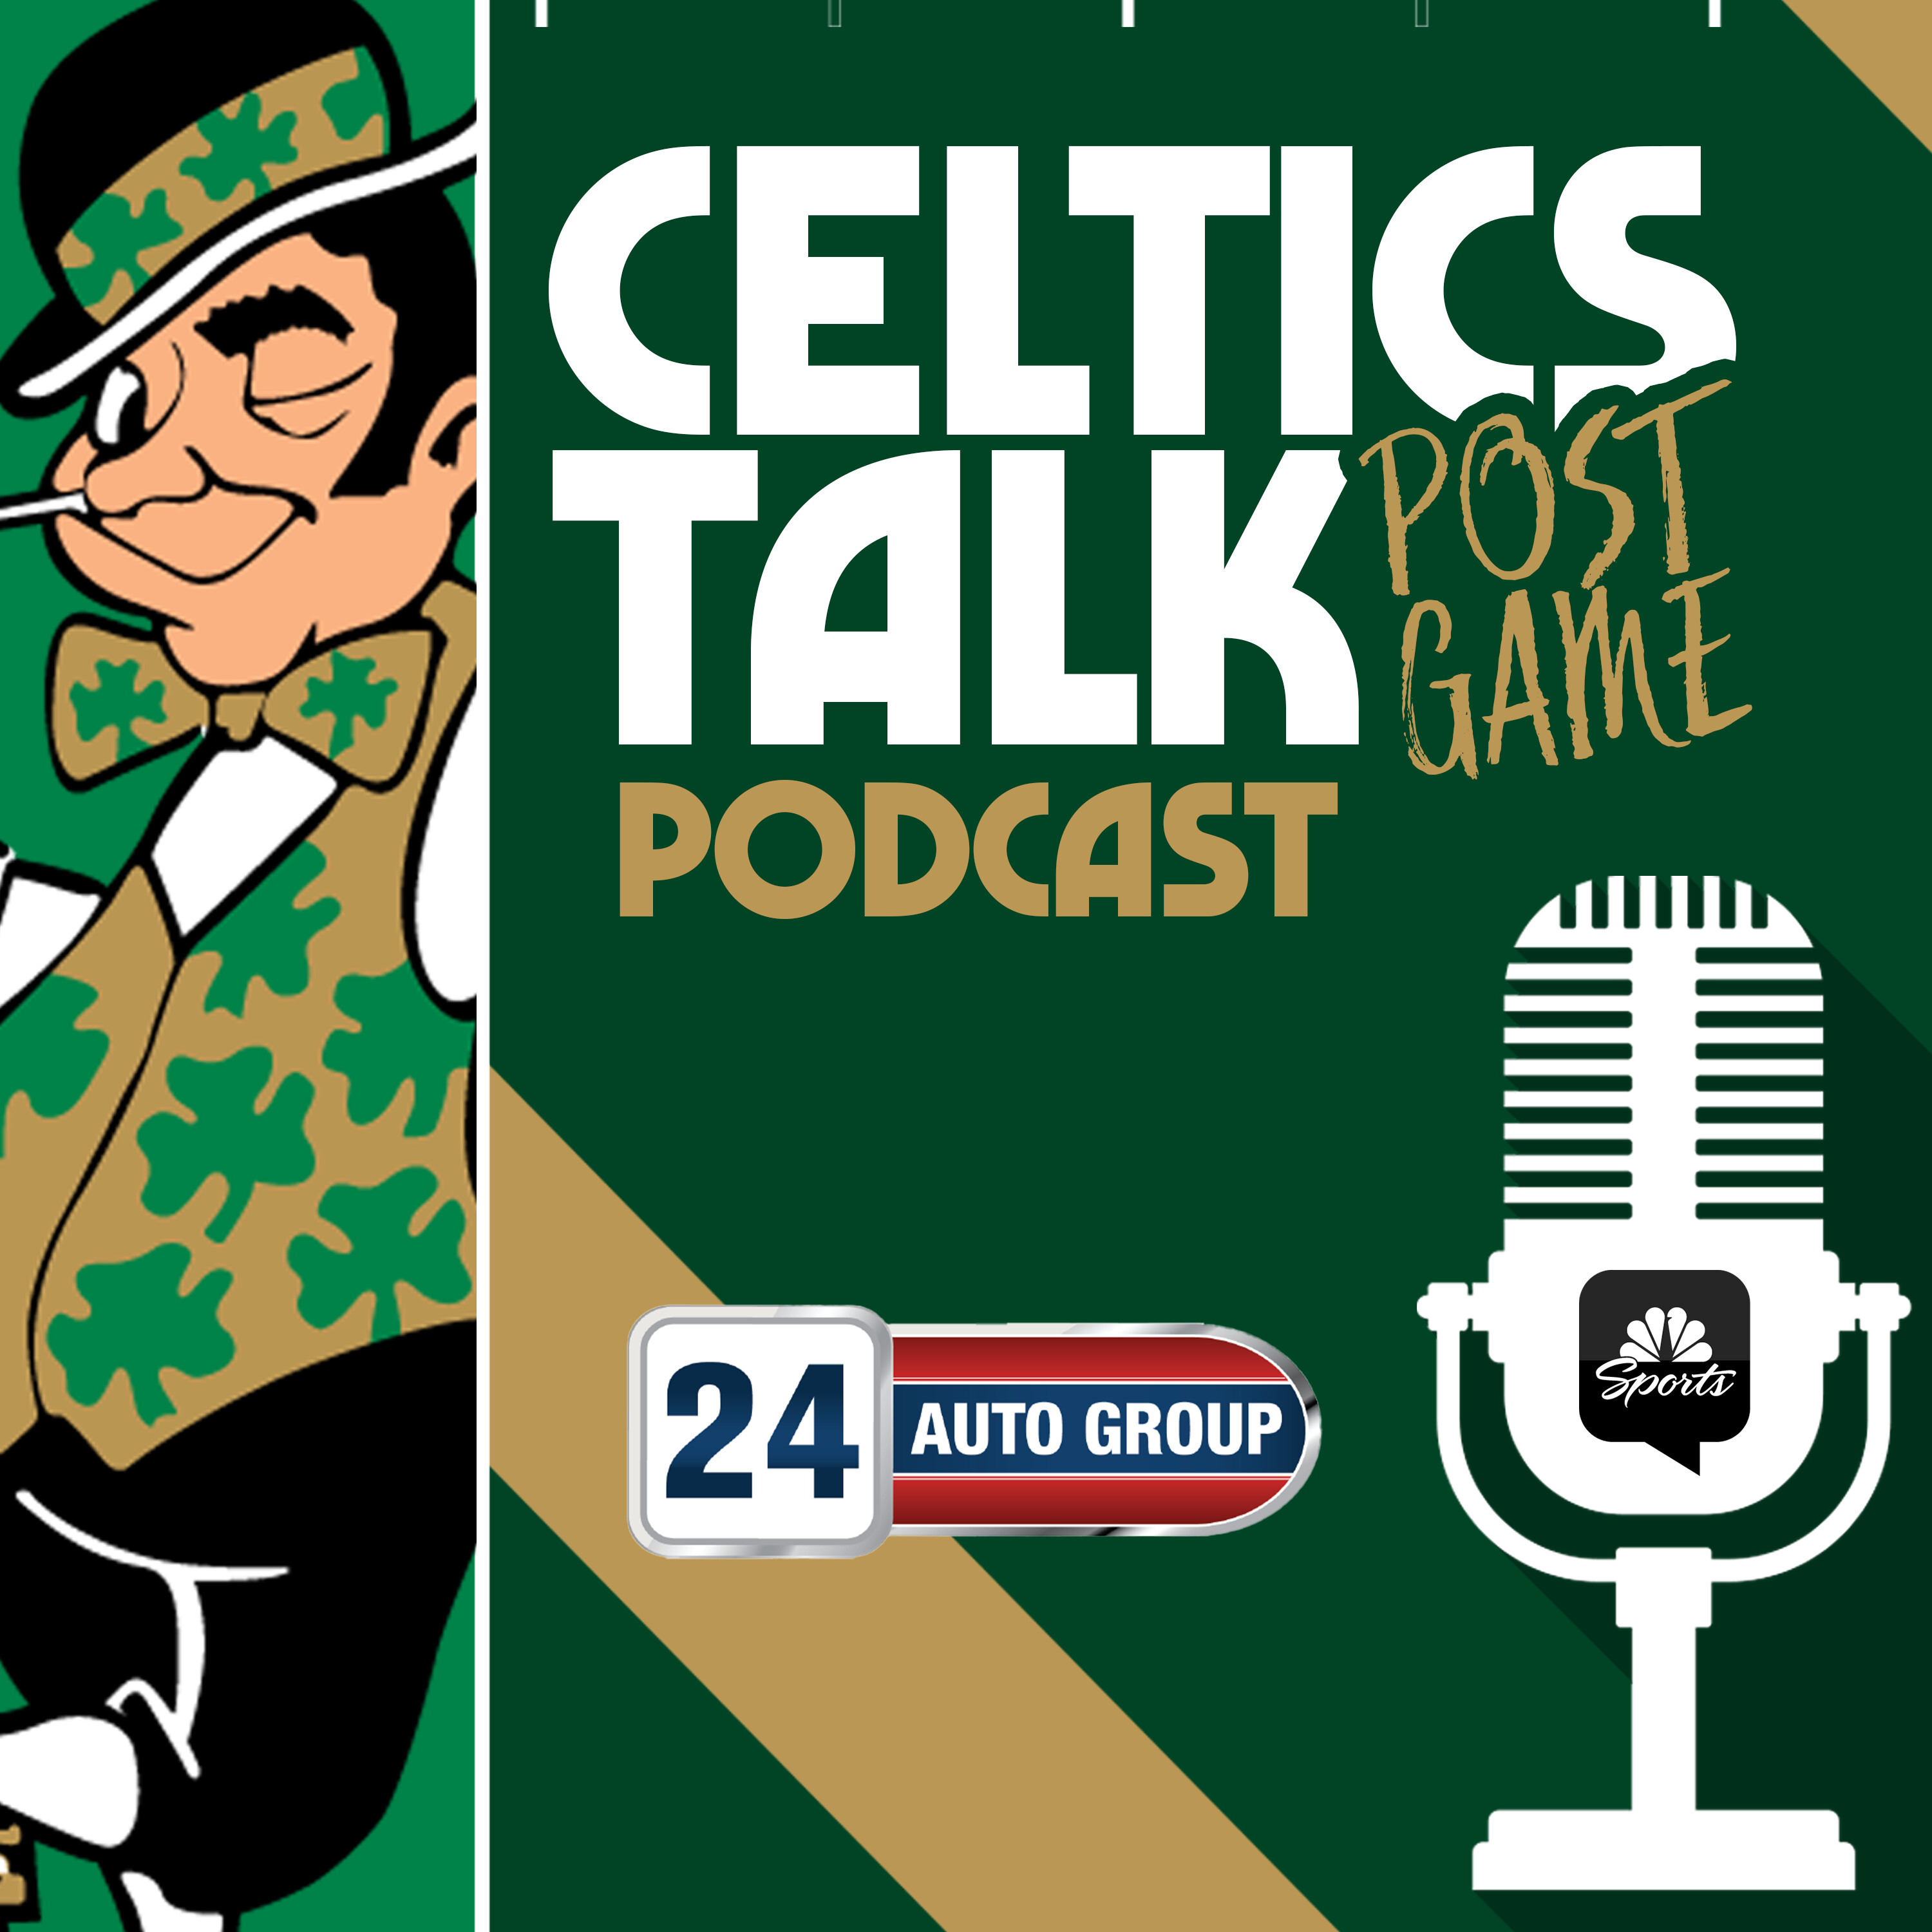 POSTGAME POD: Celtics ’avenge’ Eastern Conference Finals Game 7 loss with gutsy win over Heat